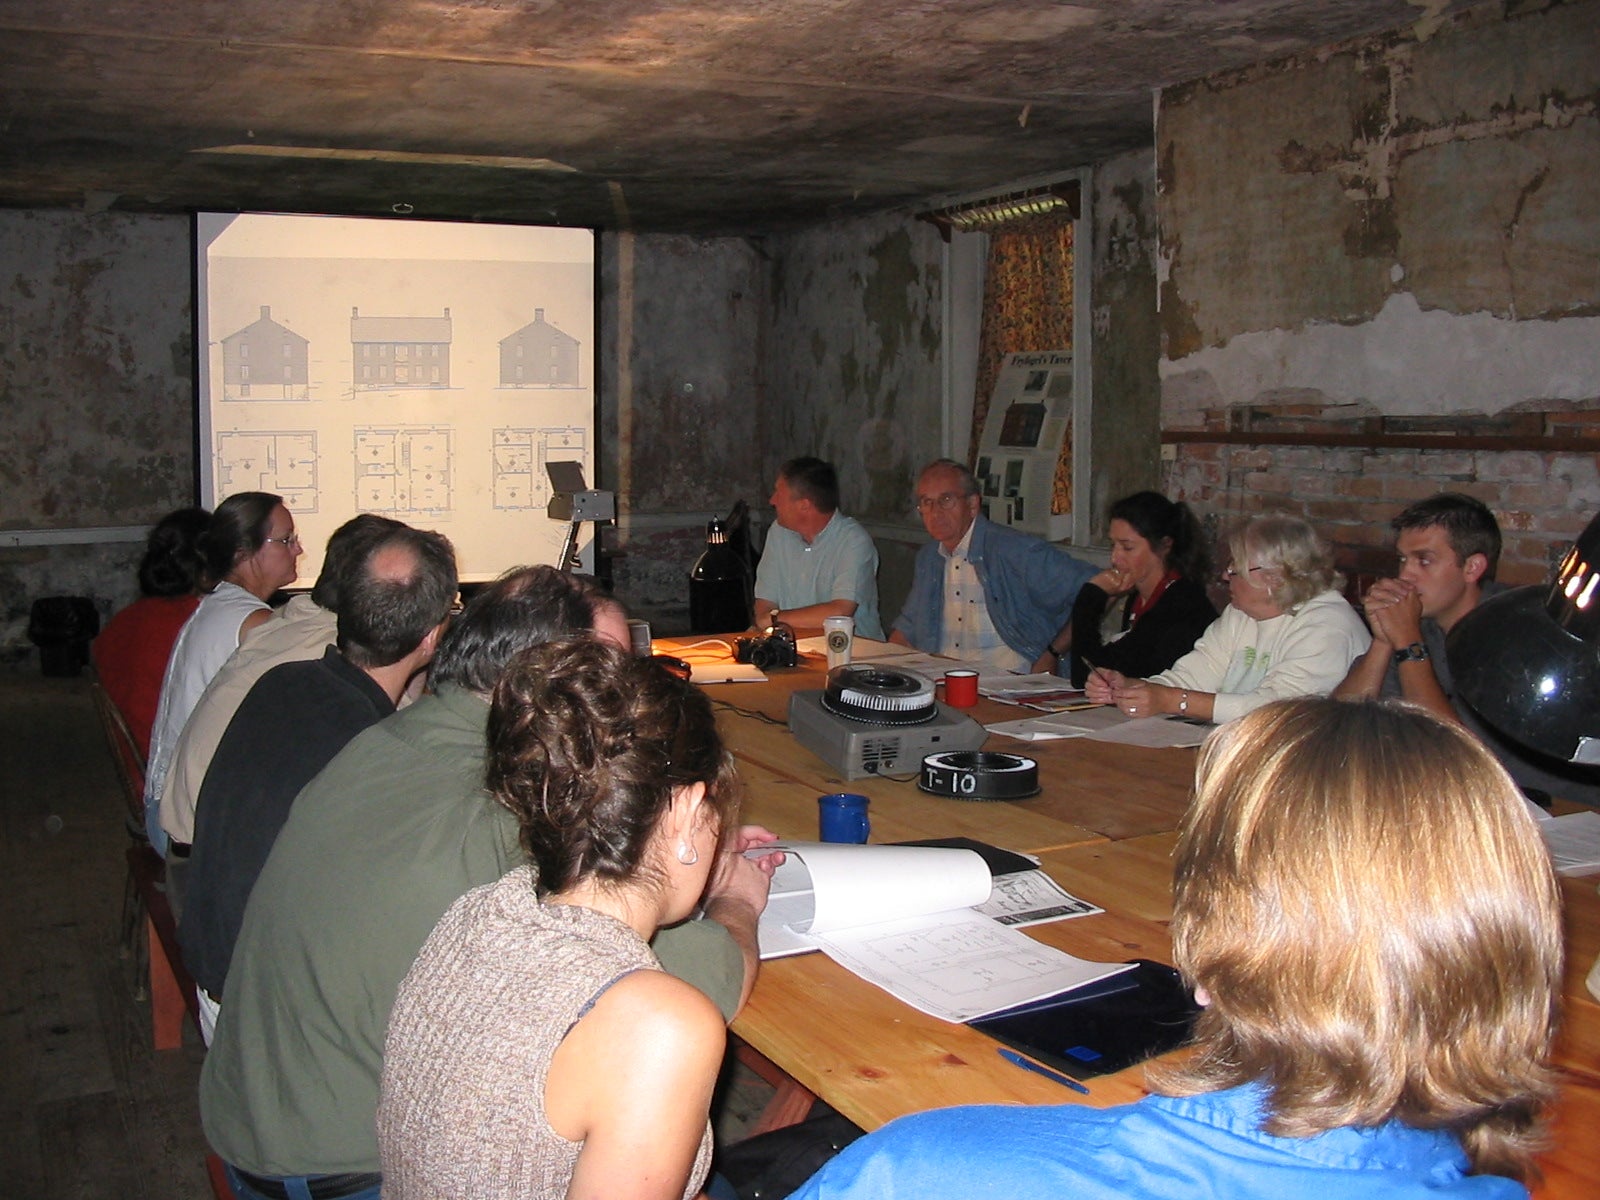 Workshop leader Phillip Grover discusses the principles of Historic Conservation.